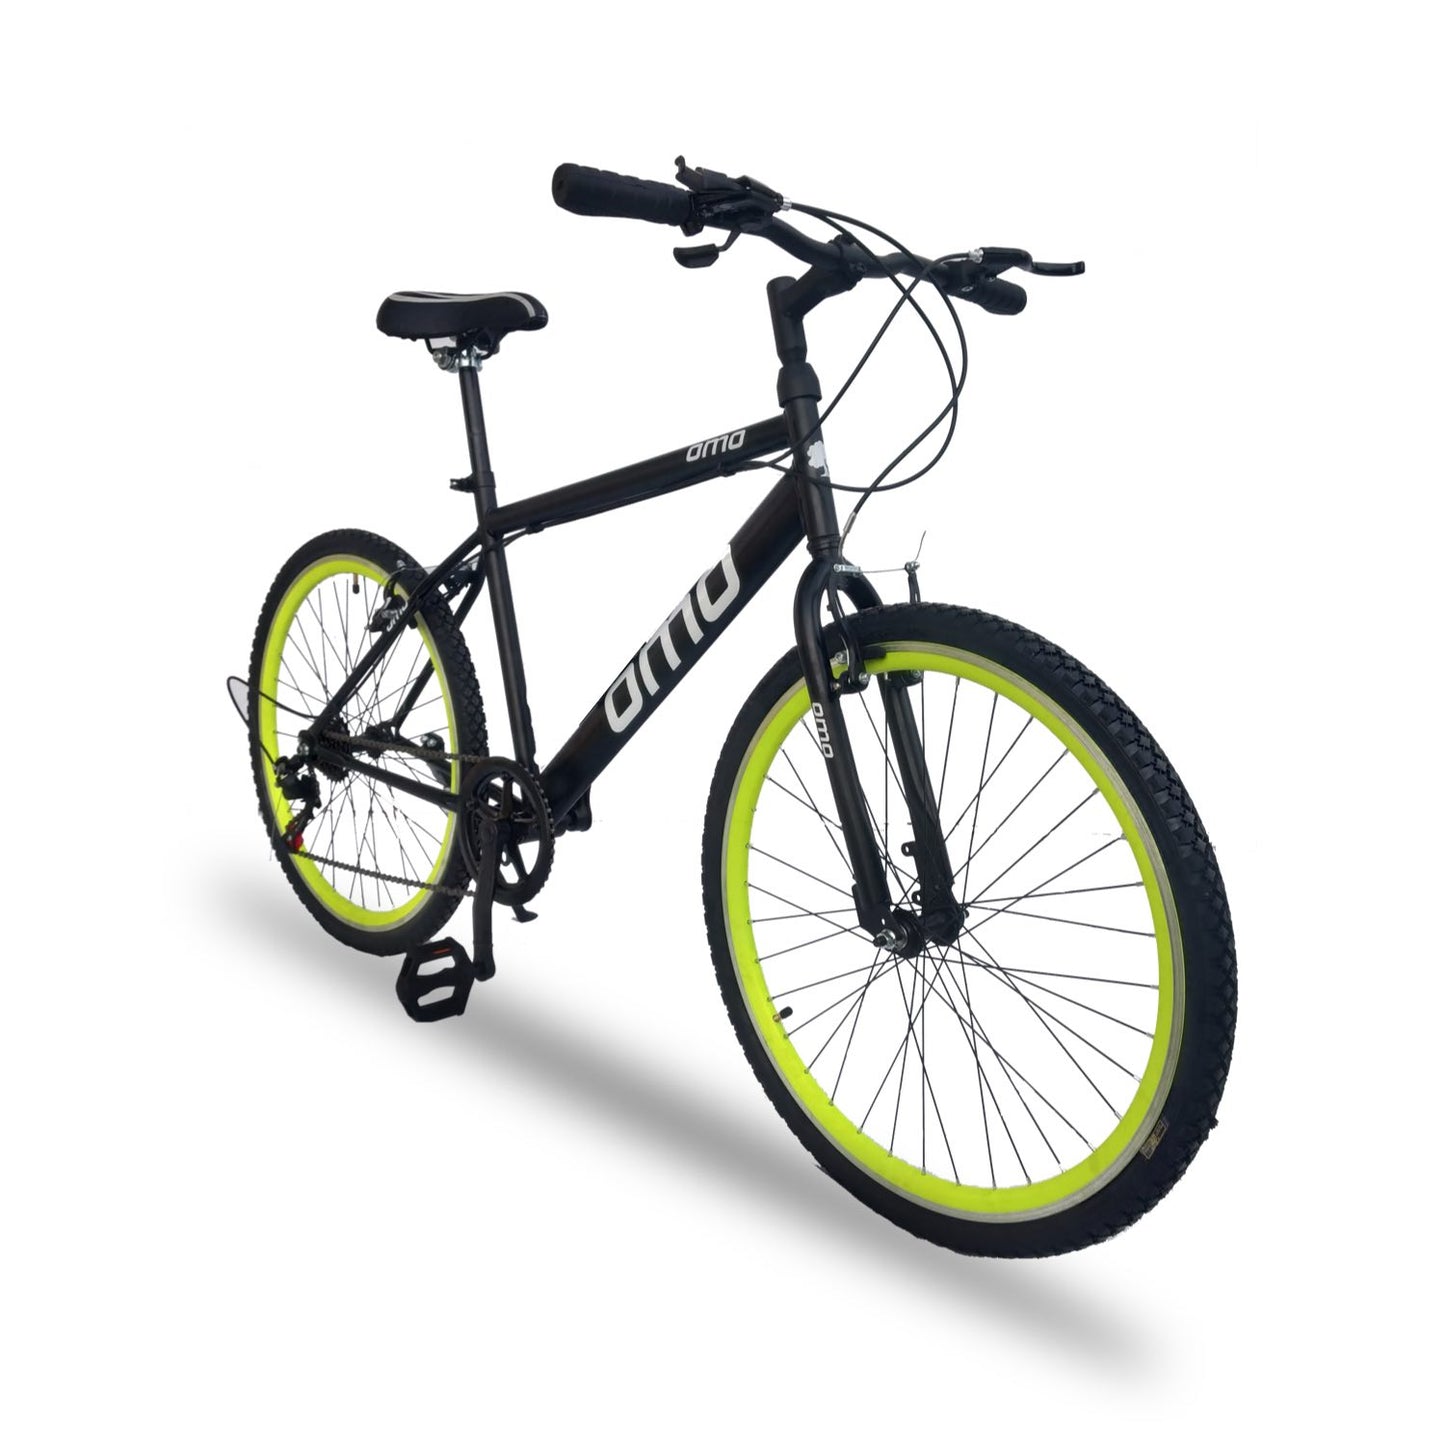 omobikes hybrid gear bicycle 26t 27.5t with shimano gear under 10000 10k for men women kids and adults green color